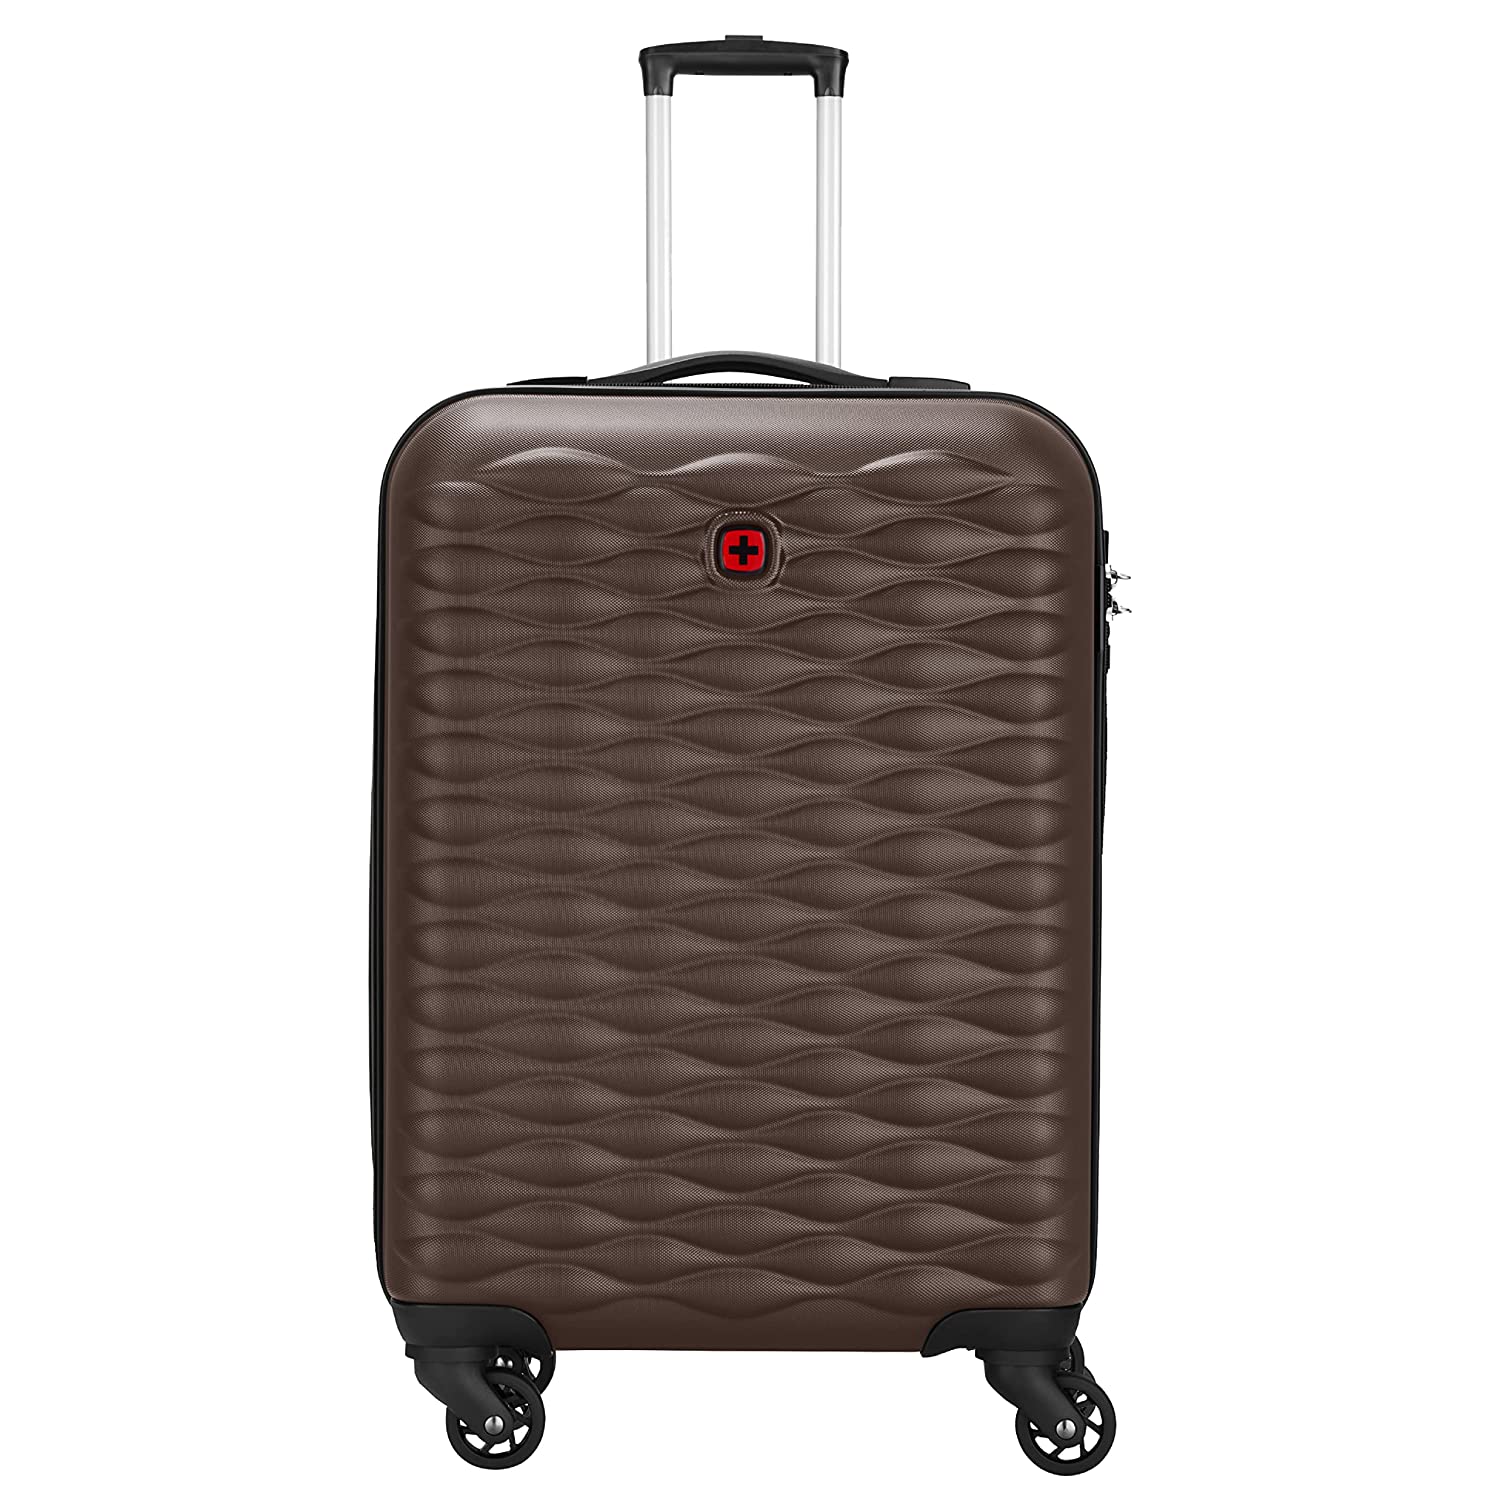 WENGER ABS Hardside Swiss Suitcase